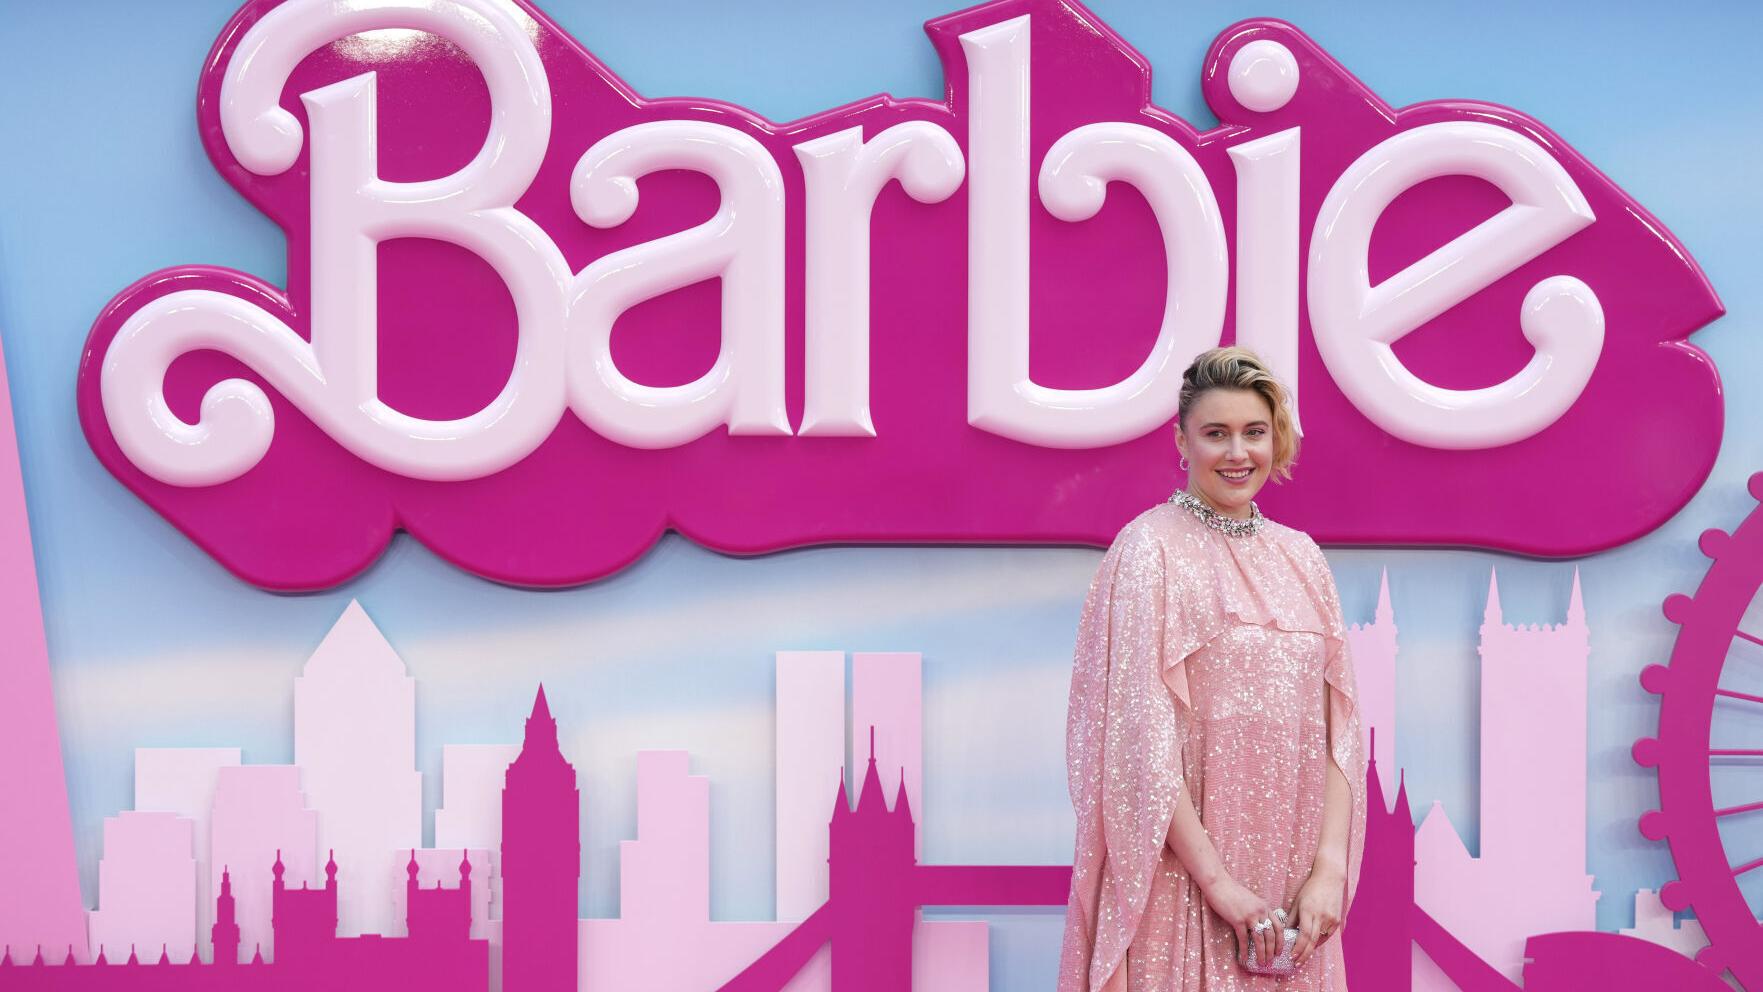 'Barbie' has legs: Greta Gerwig's film tops box office again and gives industry a midsummer surge